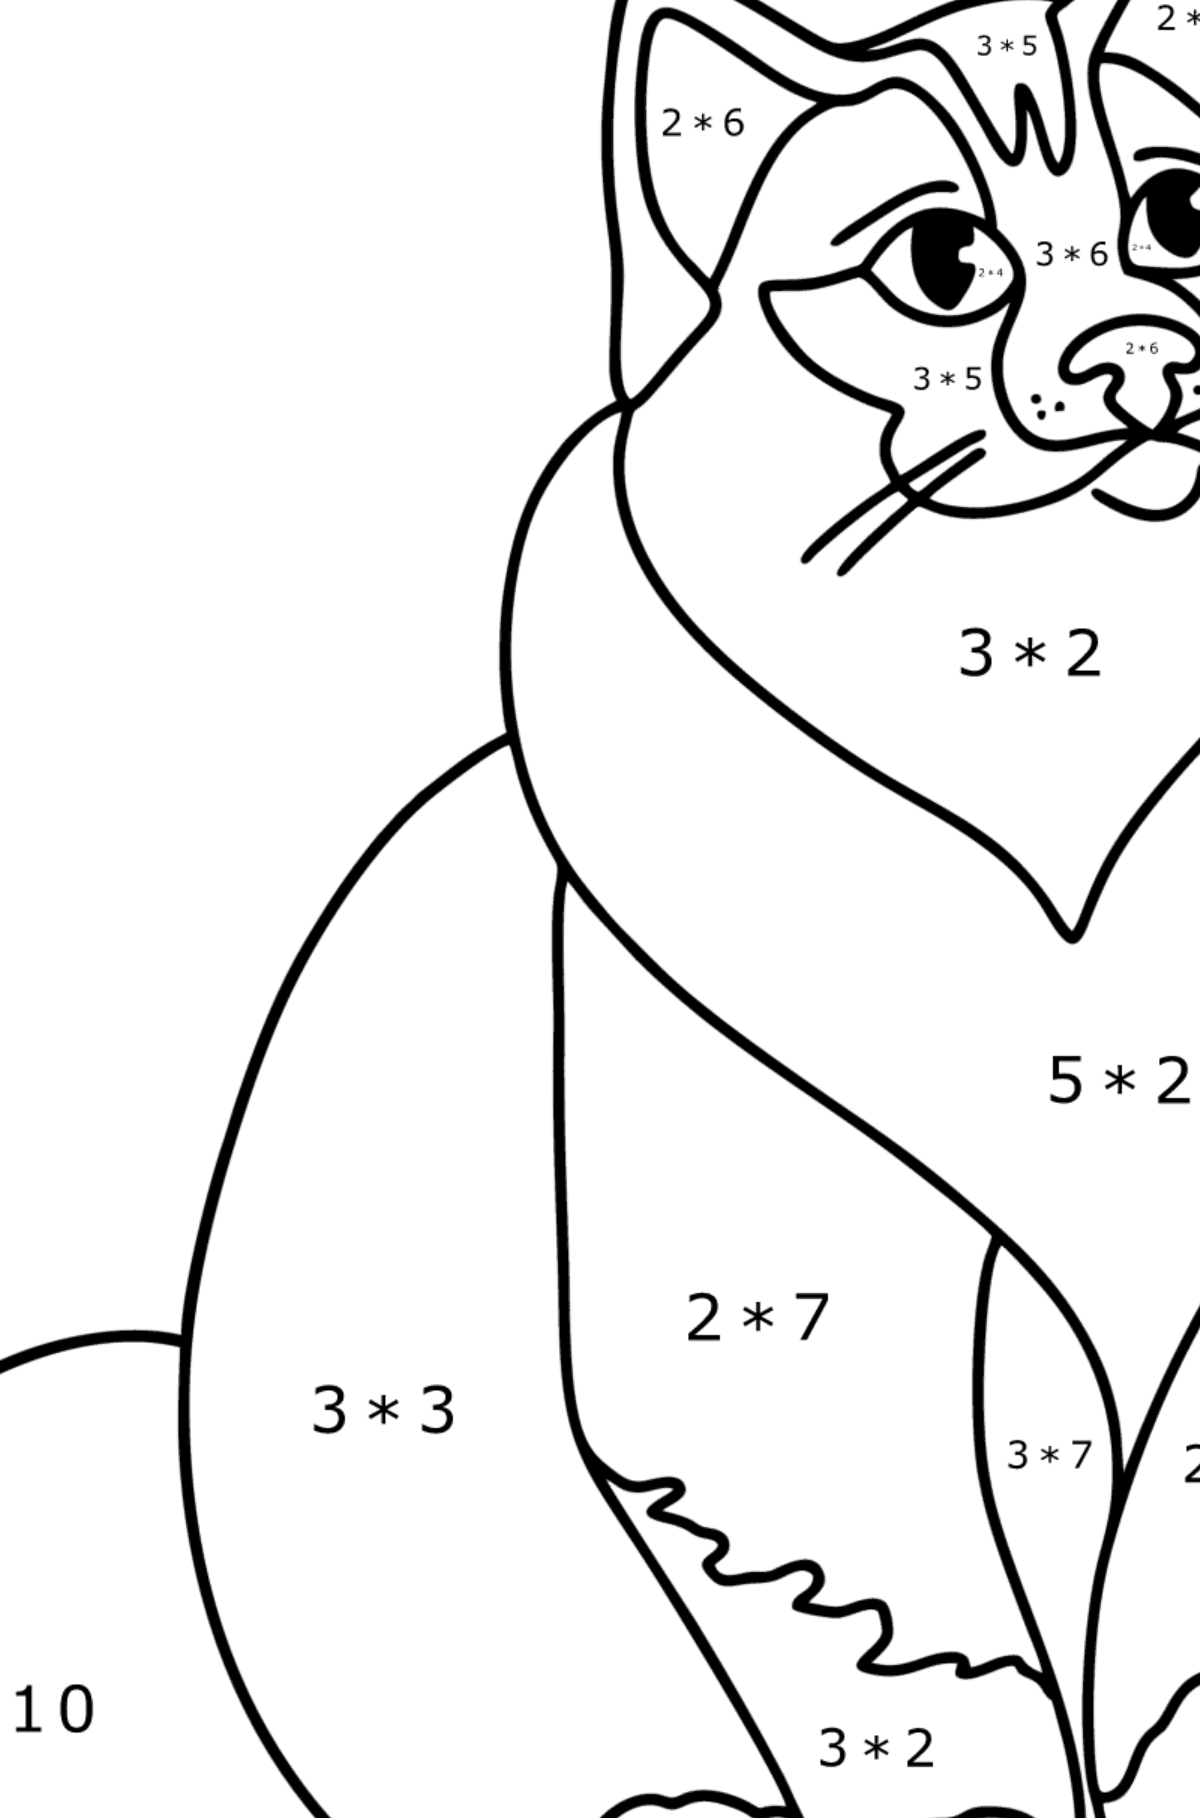 Burmese Cat coloring page - Math Coloring - Multiplication for Kids